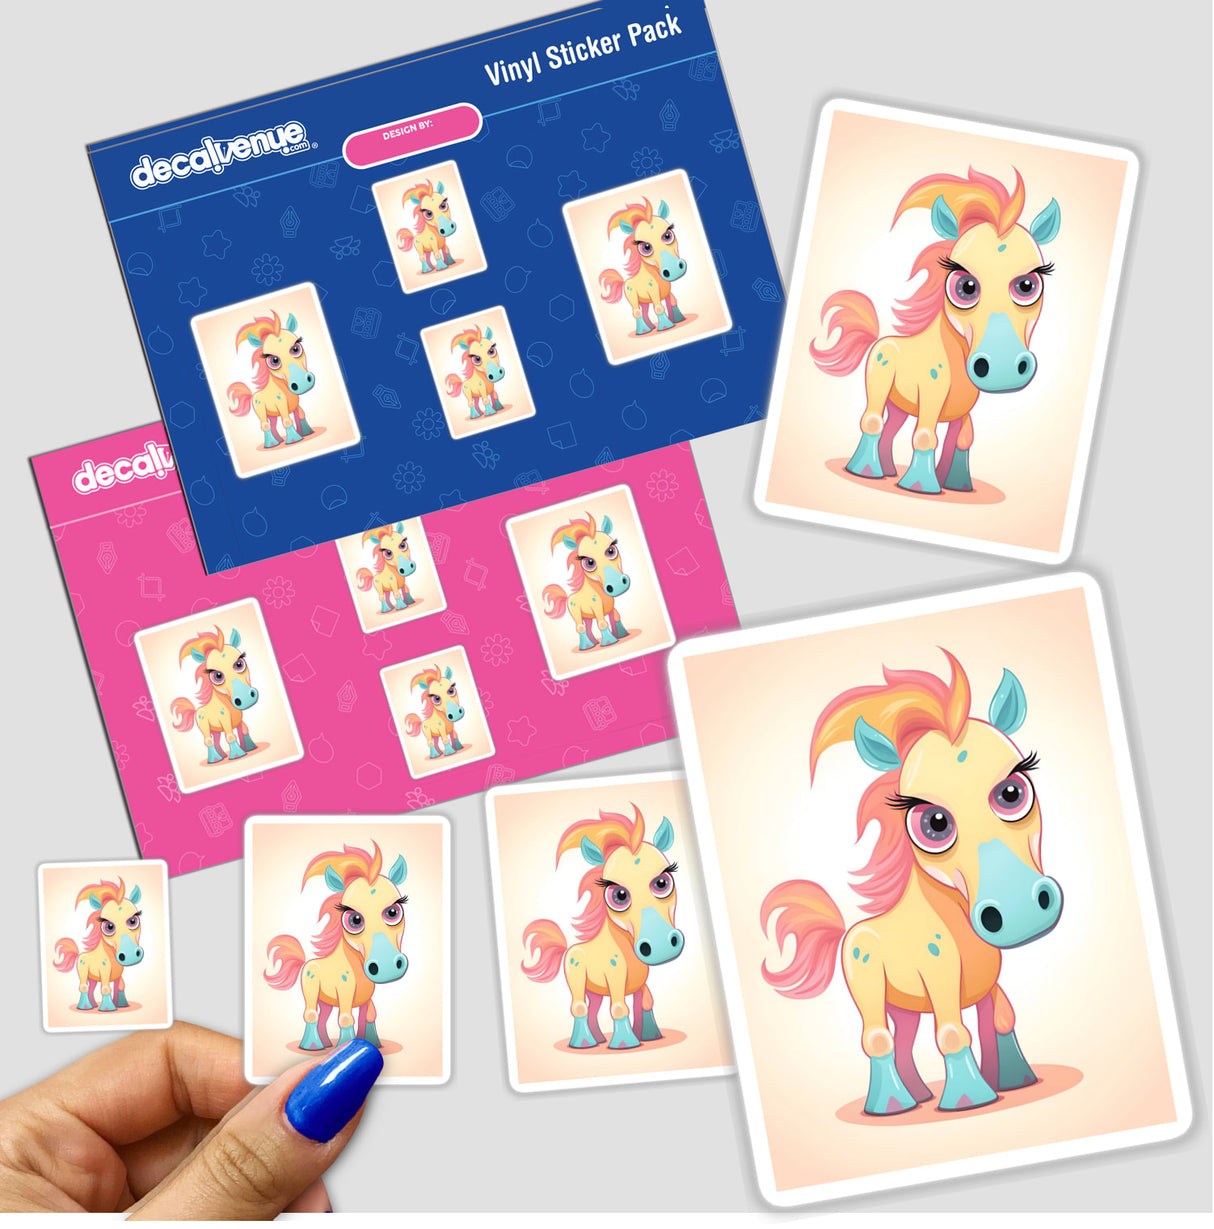 Adorable cartoon horse stickers with vibrant colors and expressive facial features, displayed on a Decal Venue vinyl sticker pack.